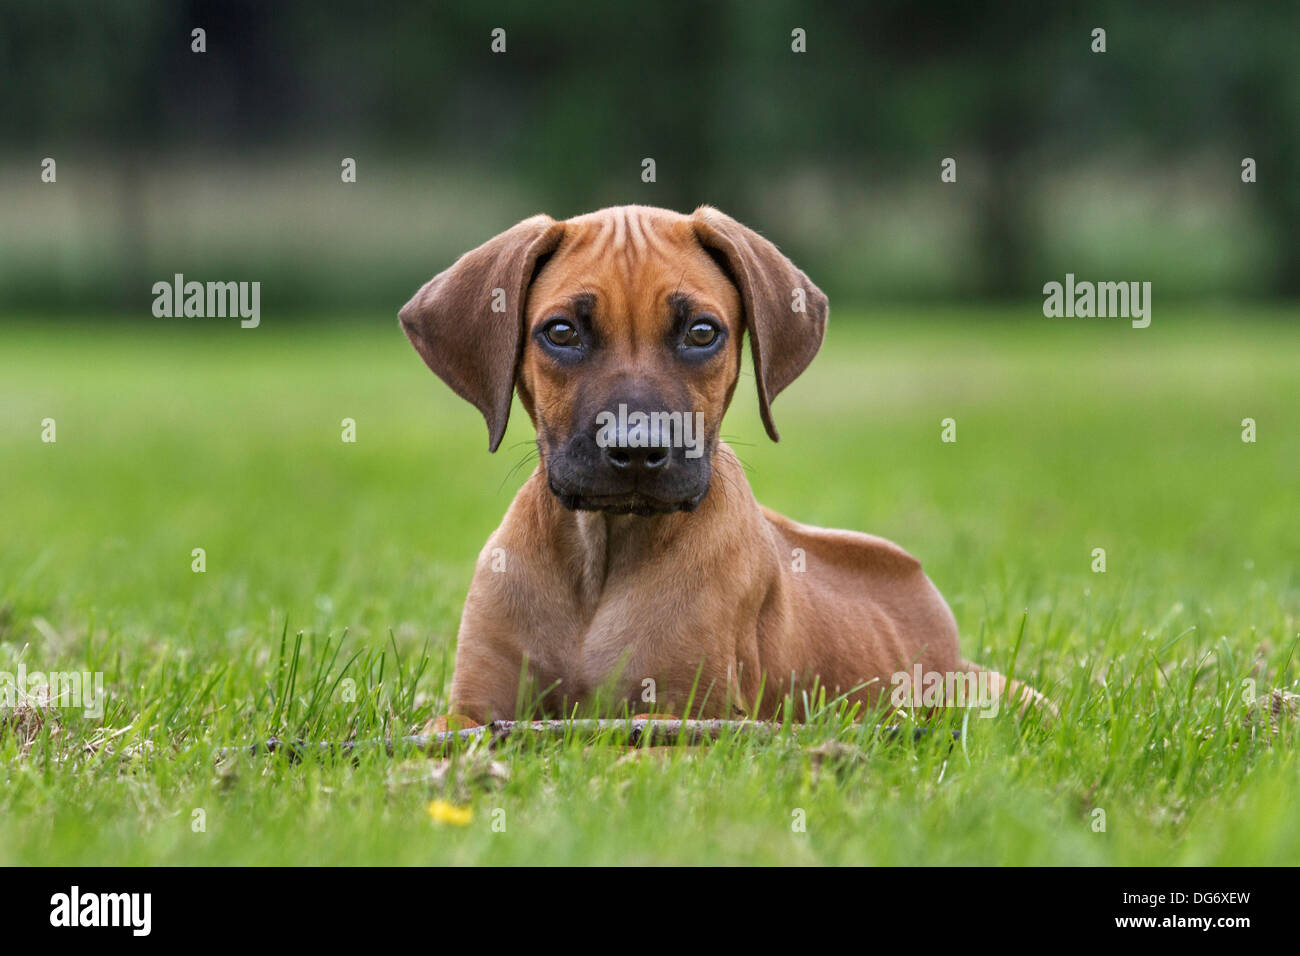 Rhodesian Ridgeback / African Lion Hound (Canis lupus familiaris) pup lying on lawn in garden Stock Photo